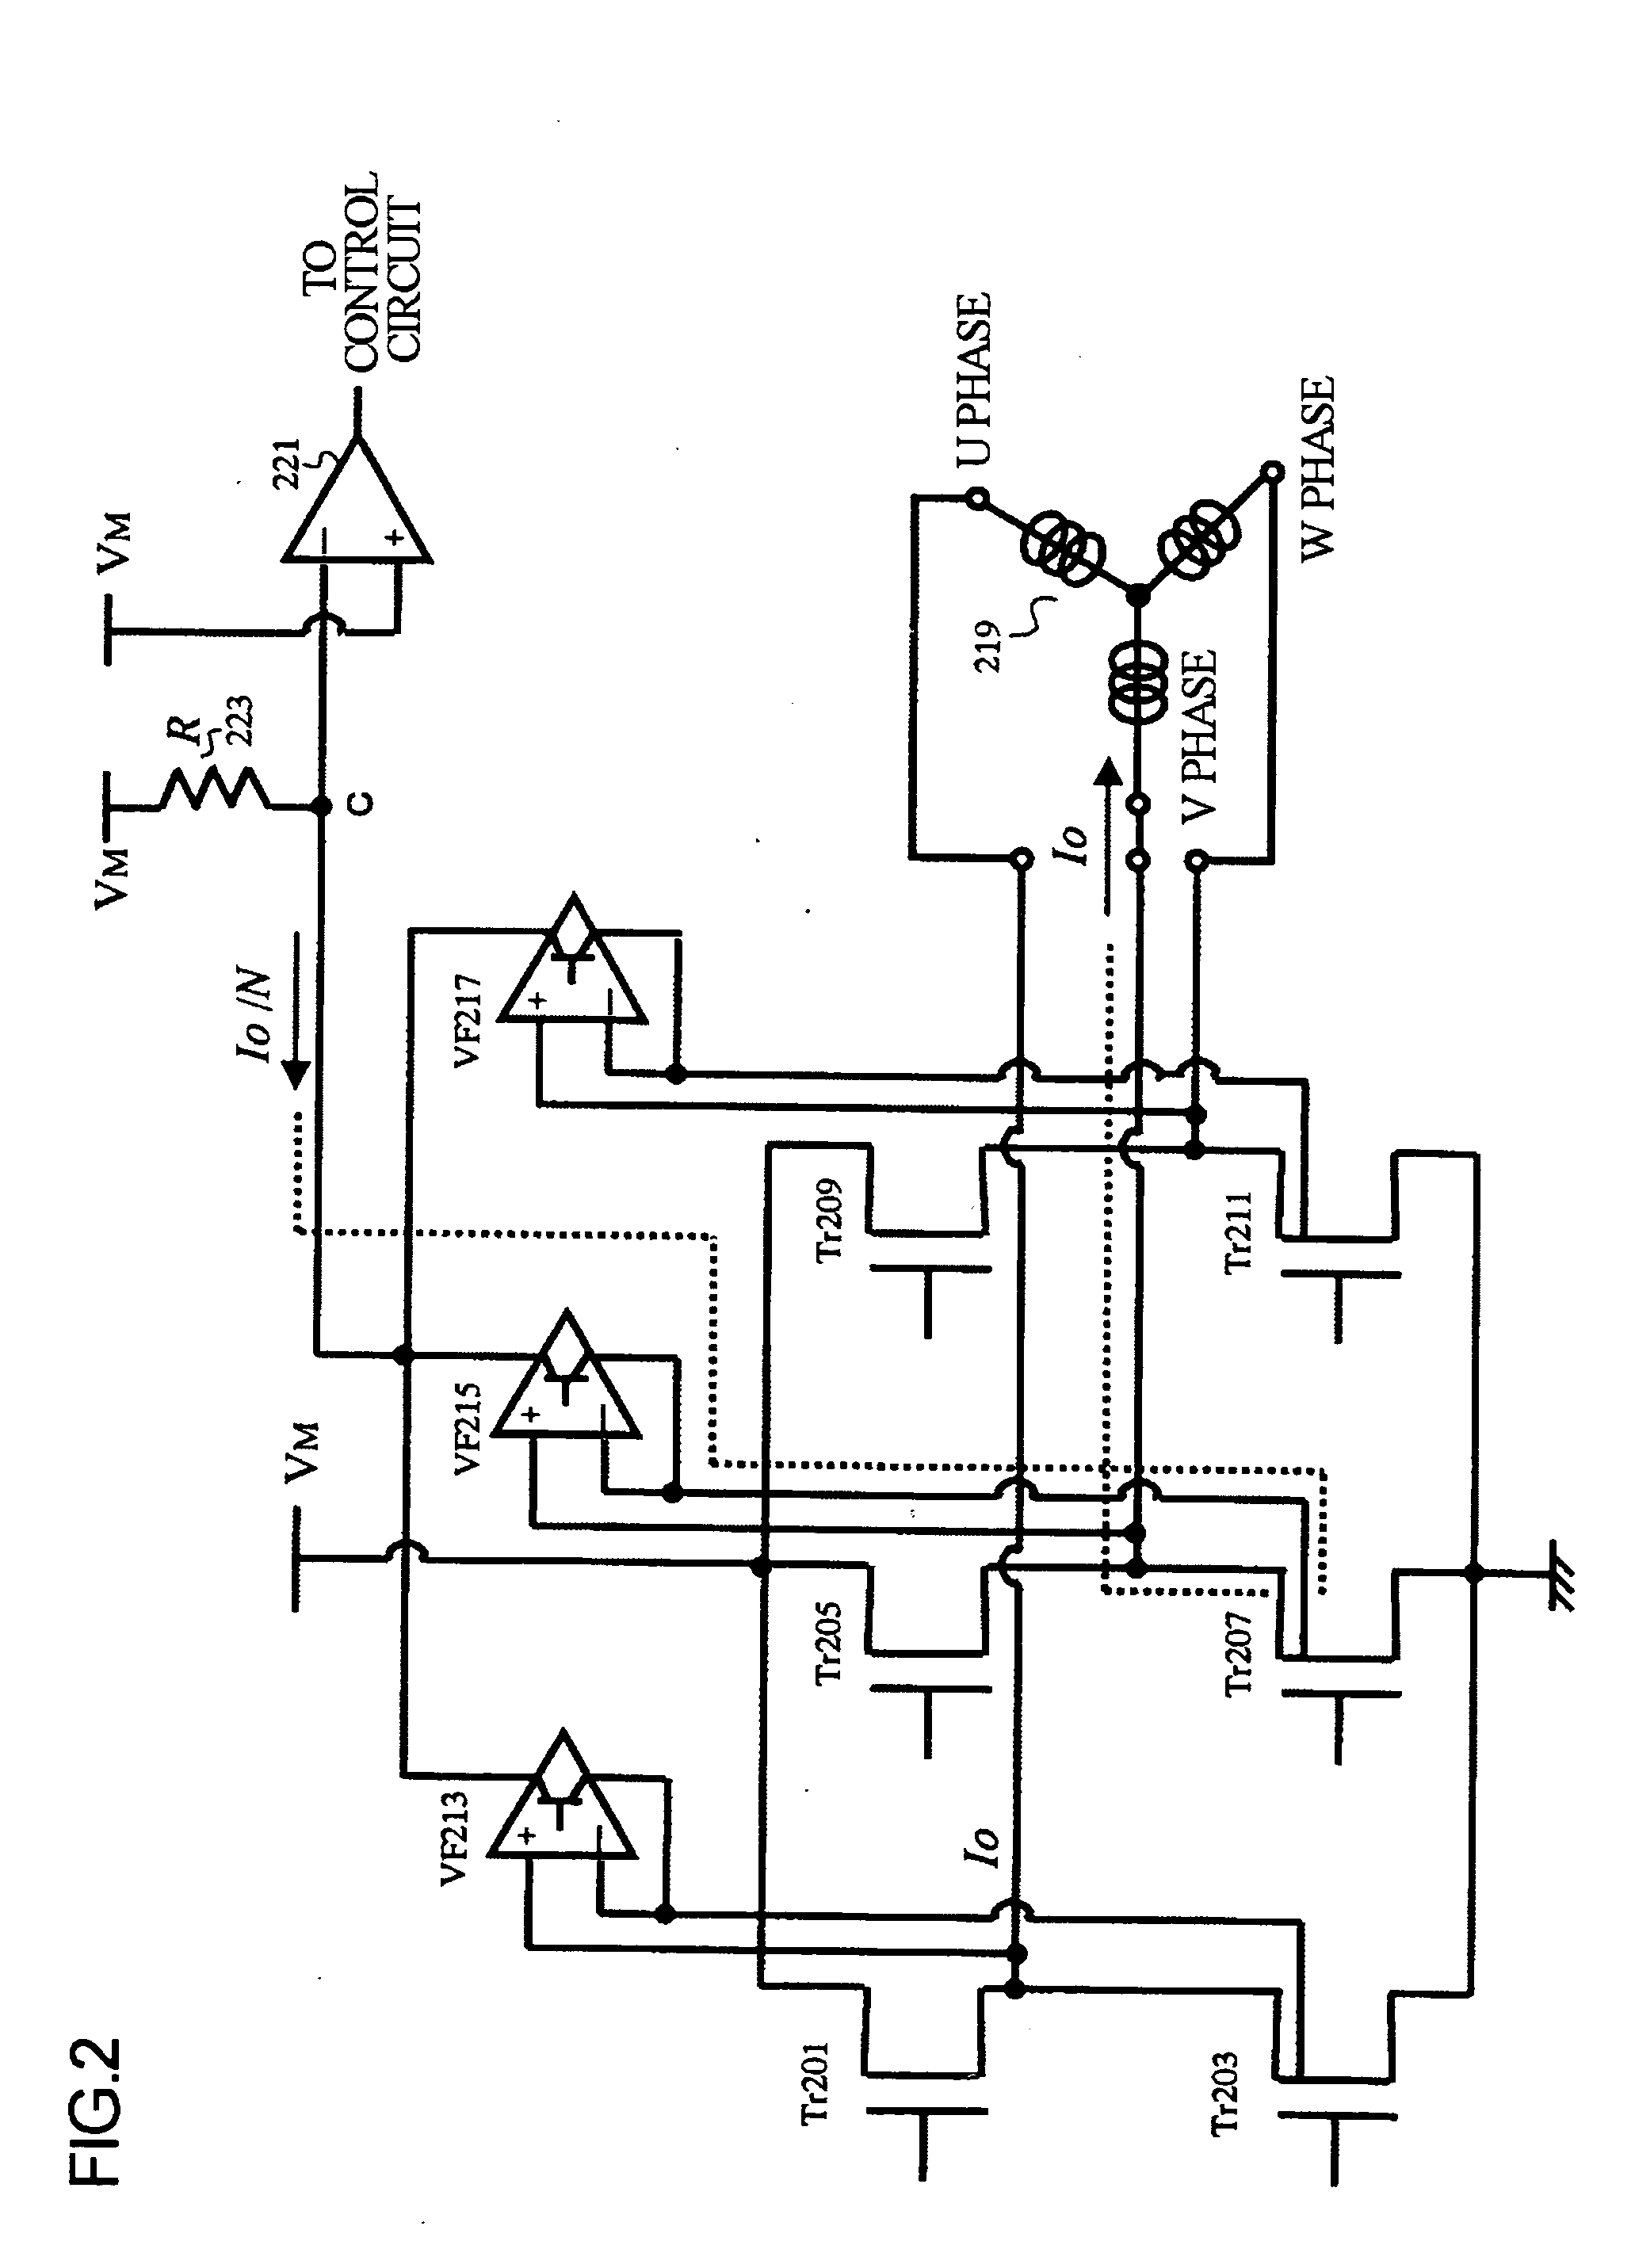 Load driving circuit with current detection capability